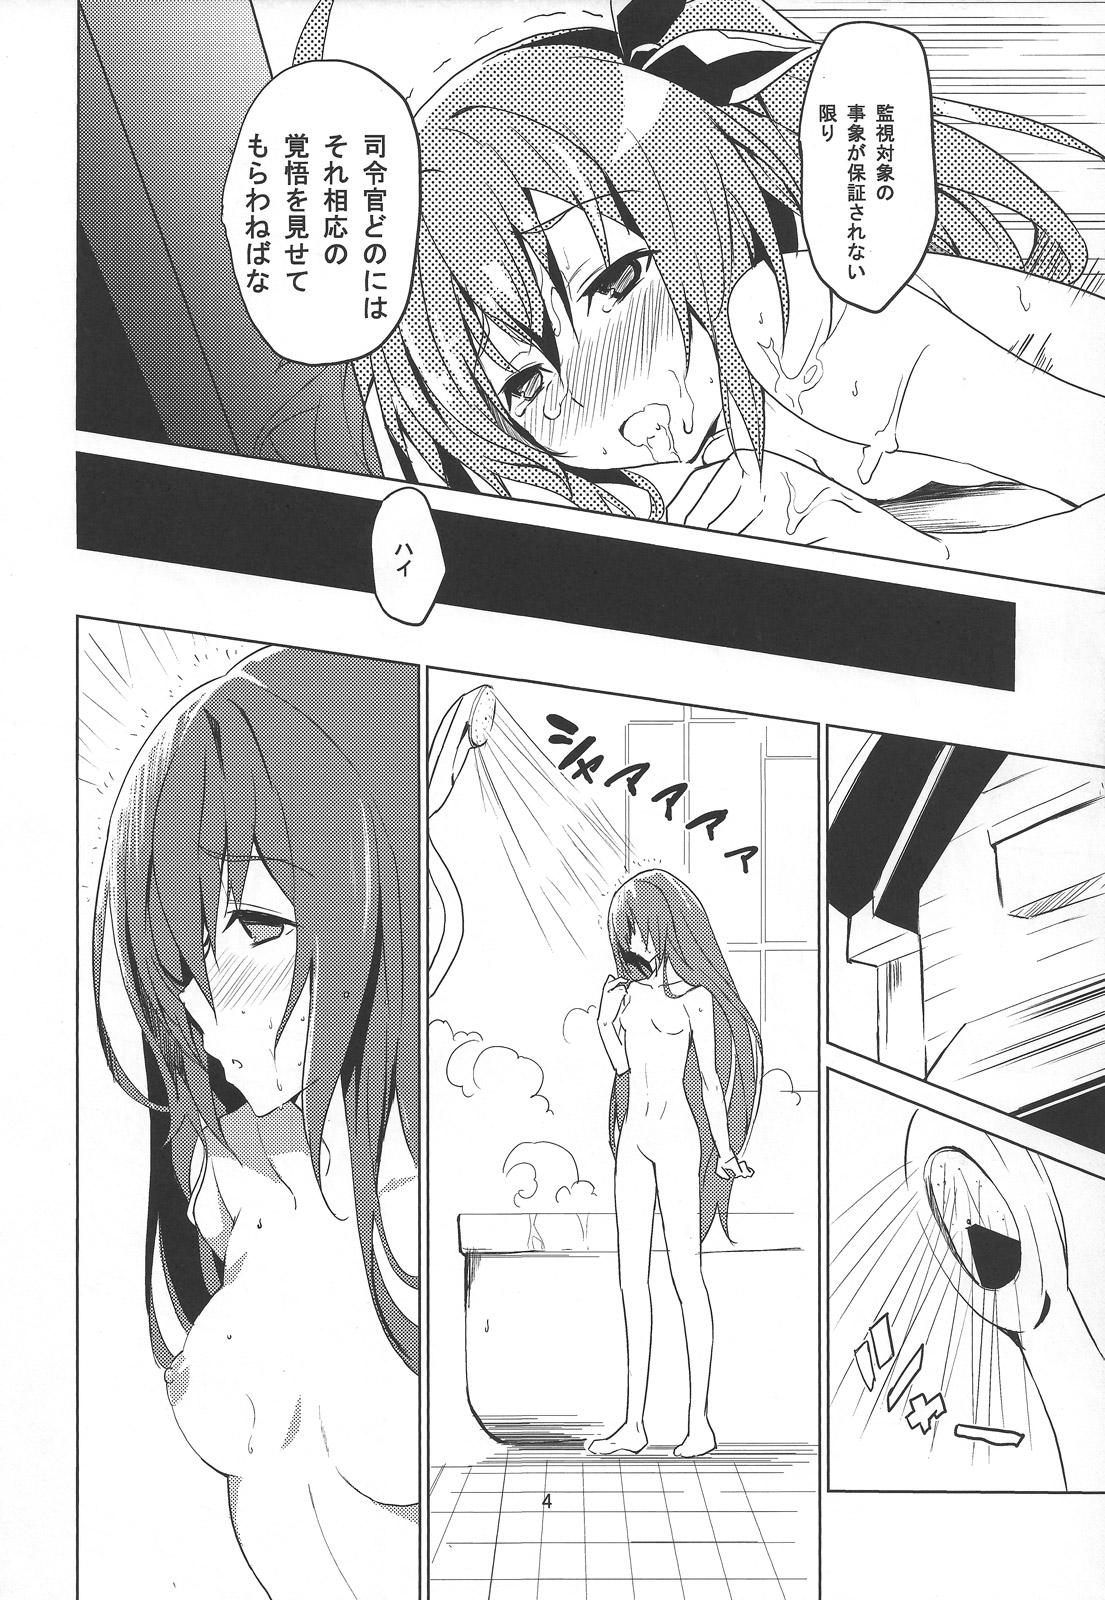 Concha hollie - Date a live Hard Core Sex - Page 5